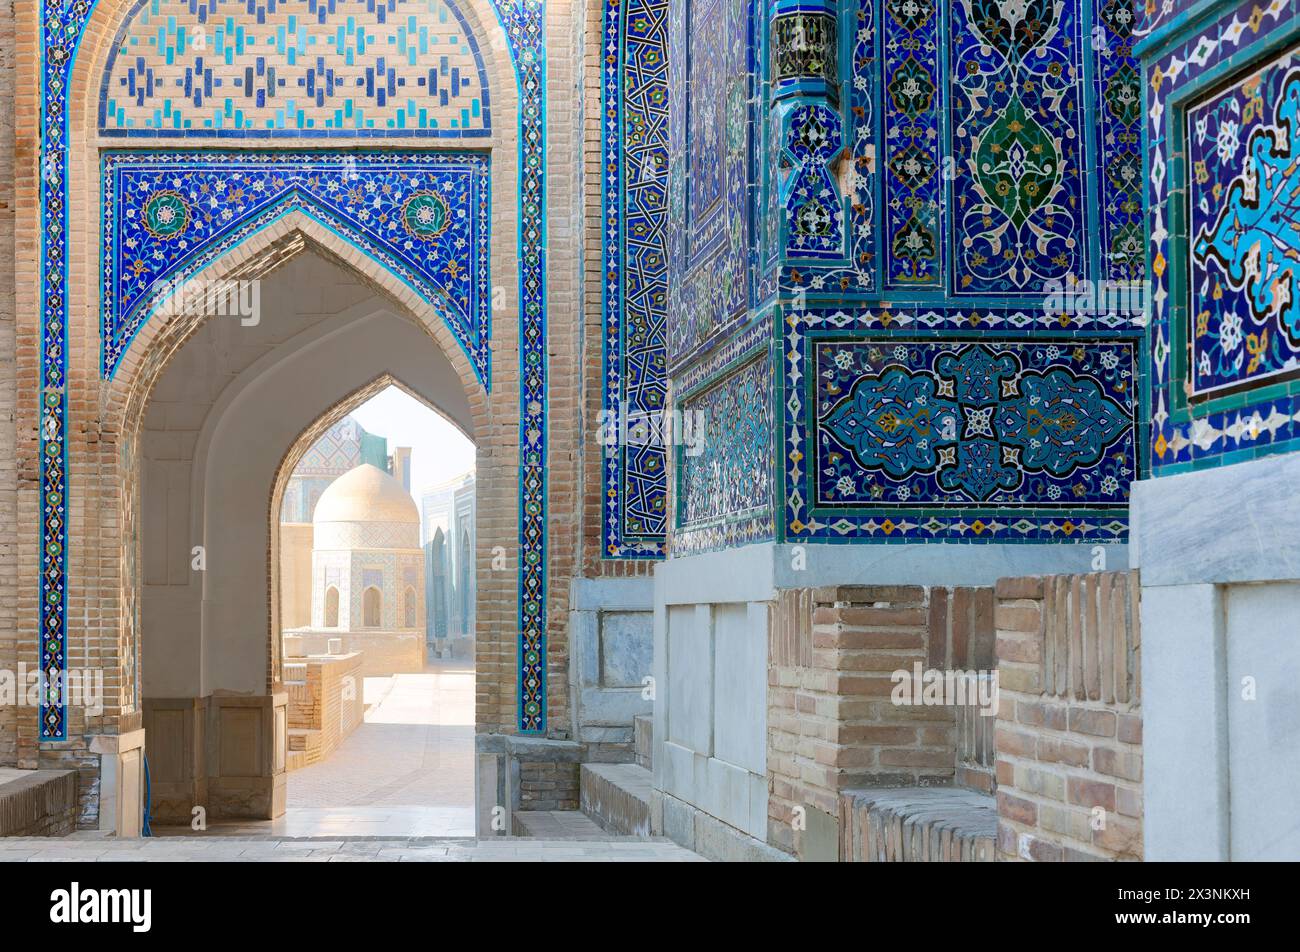 View of the mausoleums and domes of the historic Shahi Zinda cemetery through an arched gate, Samarkand, Uzbekistan. Stock Photo